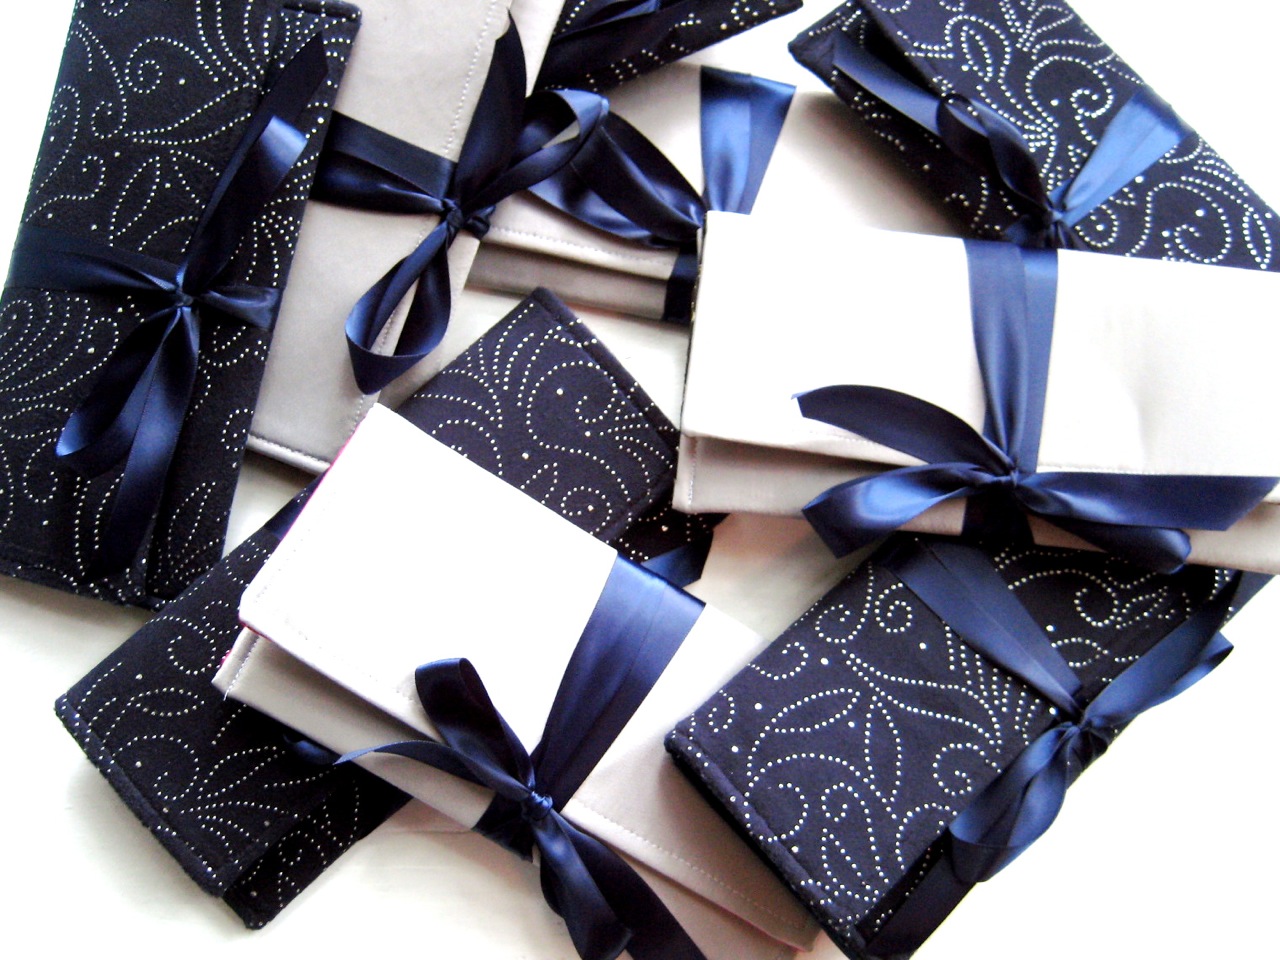 Blue and white wedding clutches